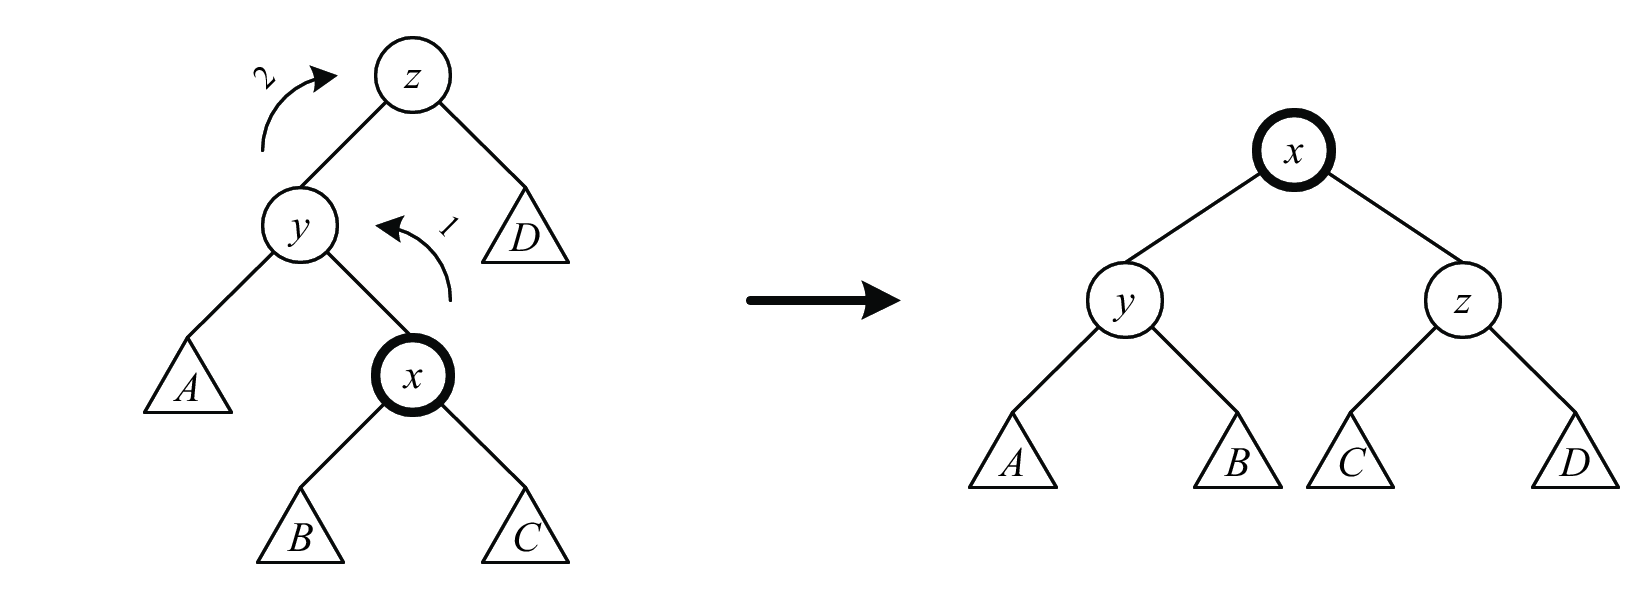 The lr (zig-zag) splay step: This is performed when x is a right child and x’s parent is a left child. The splay step consists of first a left rotation on y and then a right rotation on z. The rl (zag-zig) splay step, for x being a left child and x’s parent being a right child, is analogous.